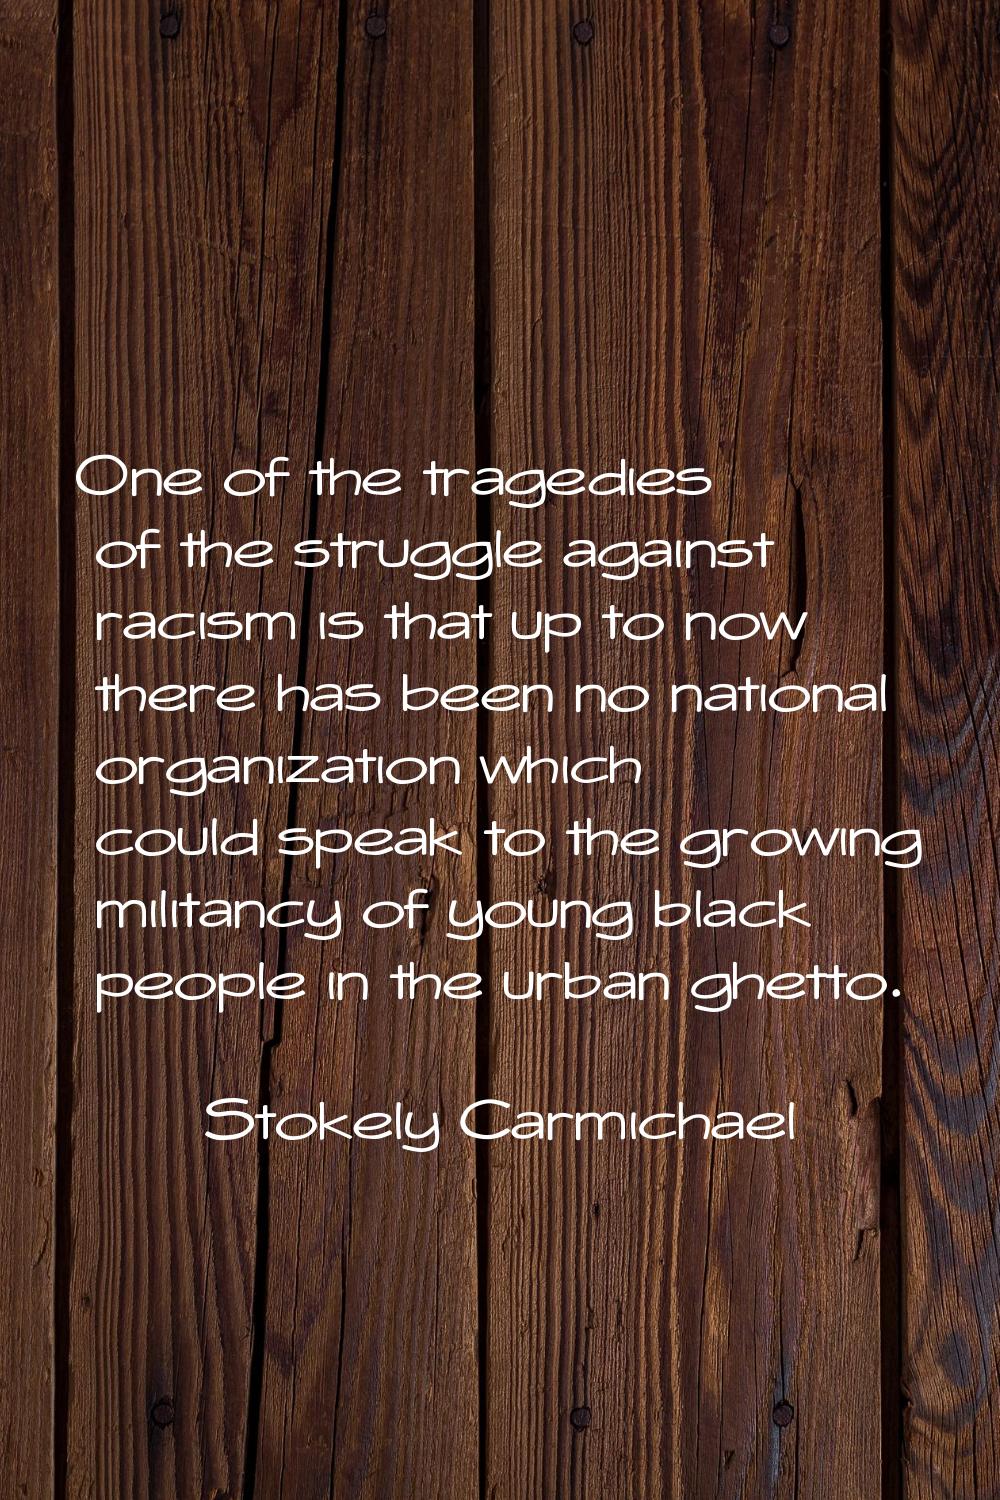 One of the tragedies of the struggle against racism is that up to now there has been no national or